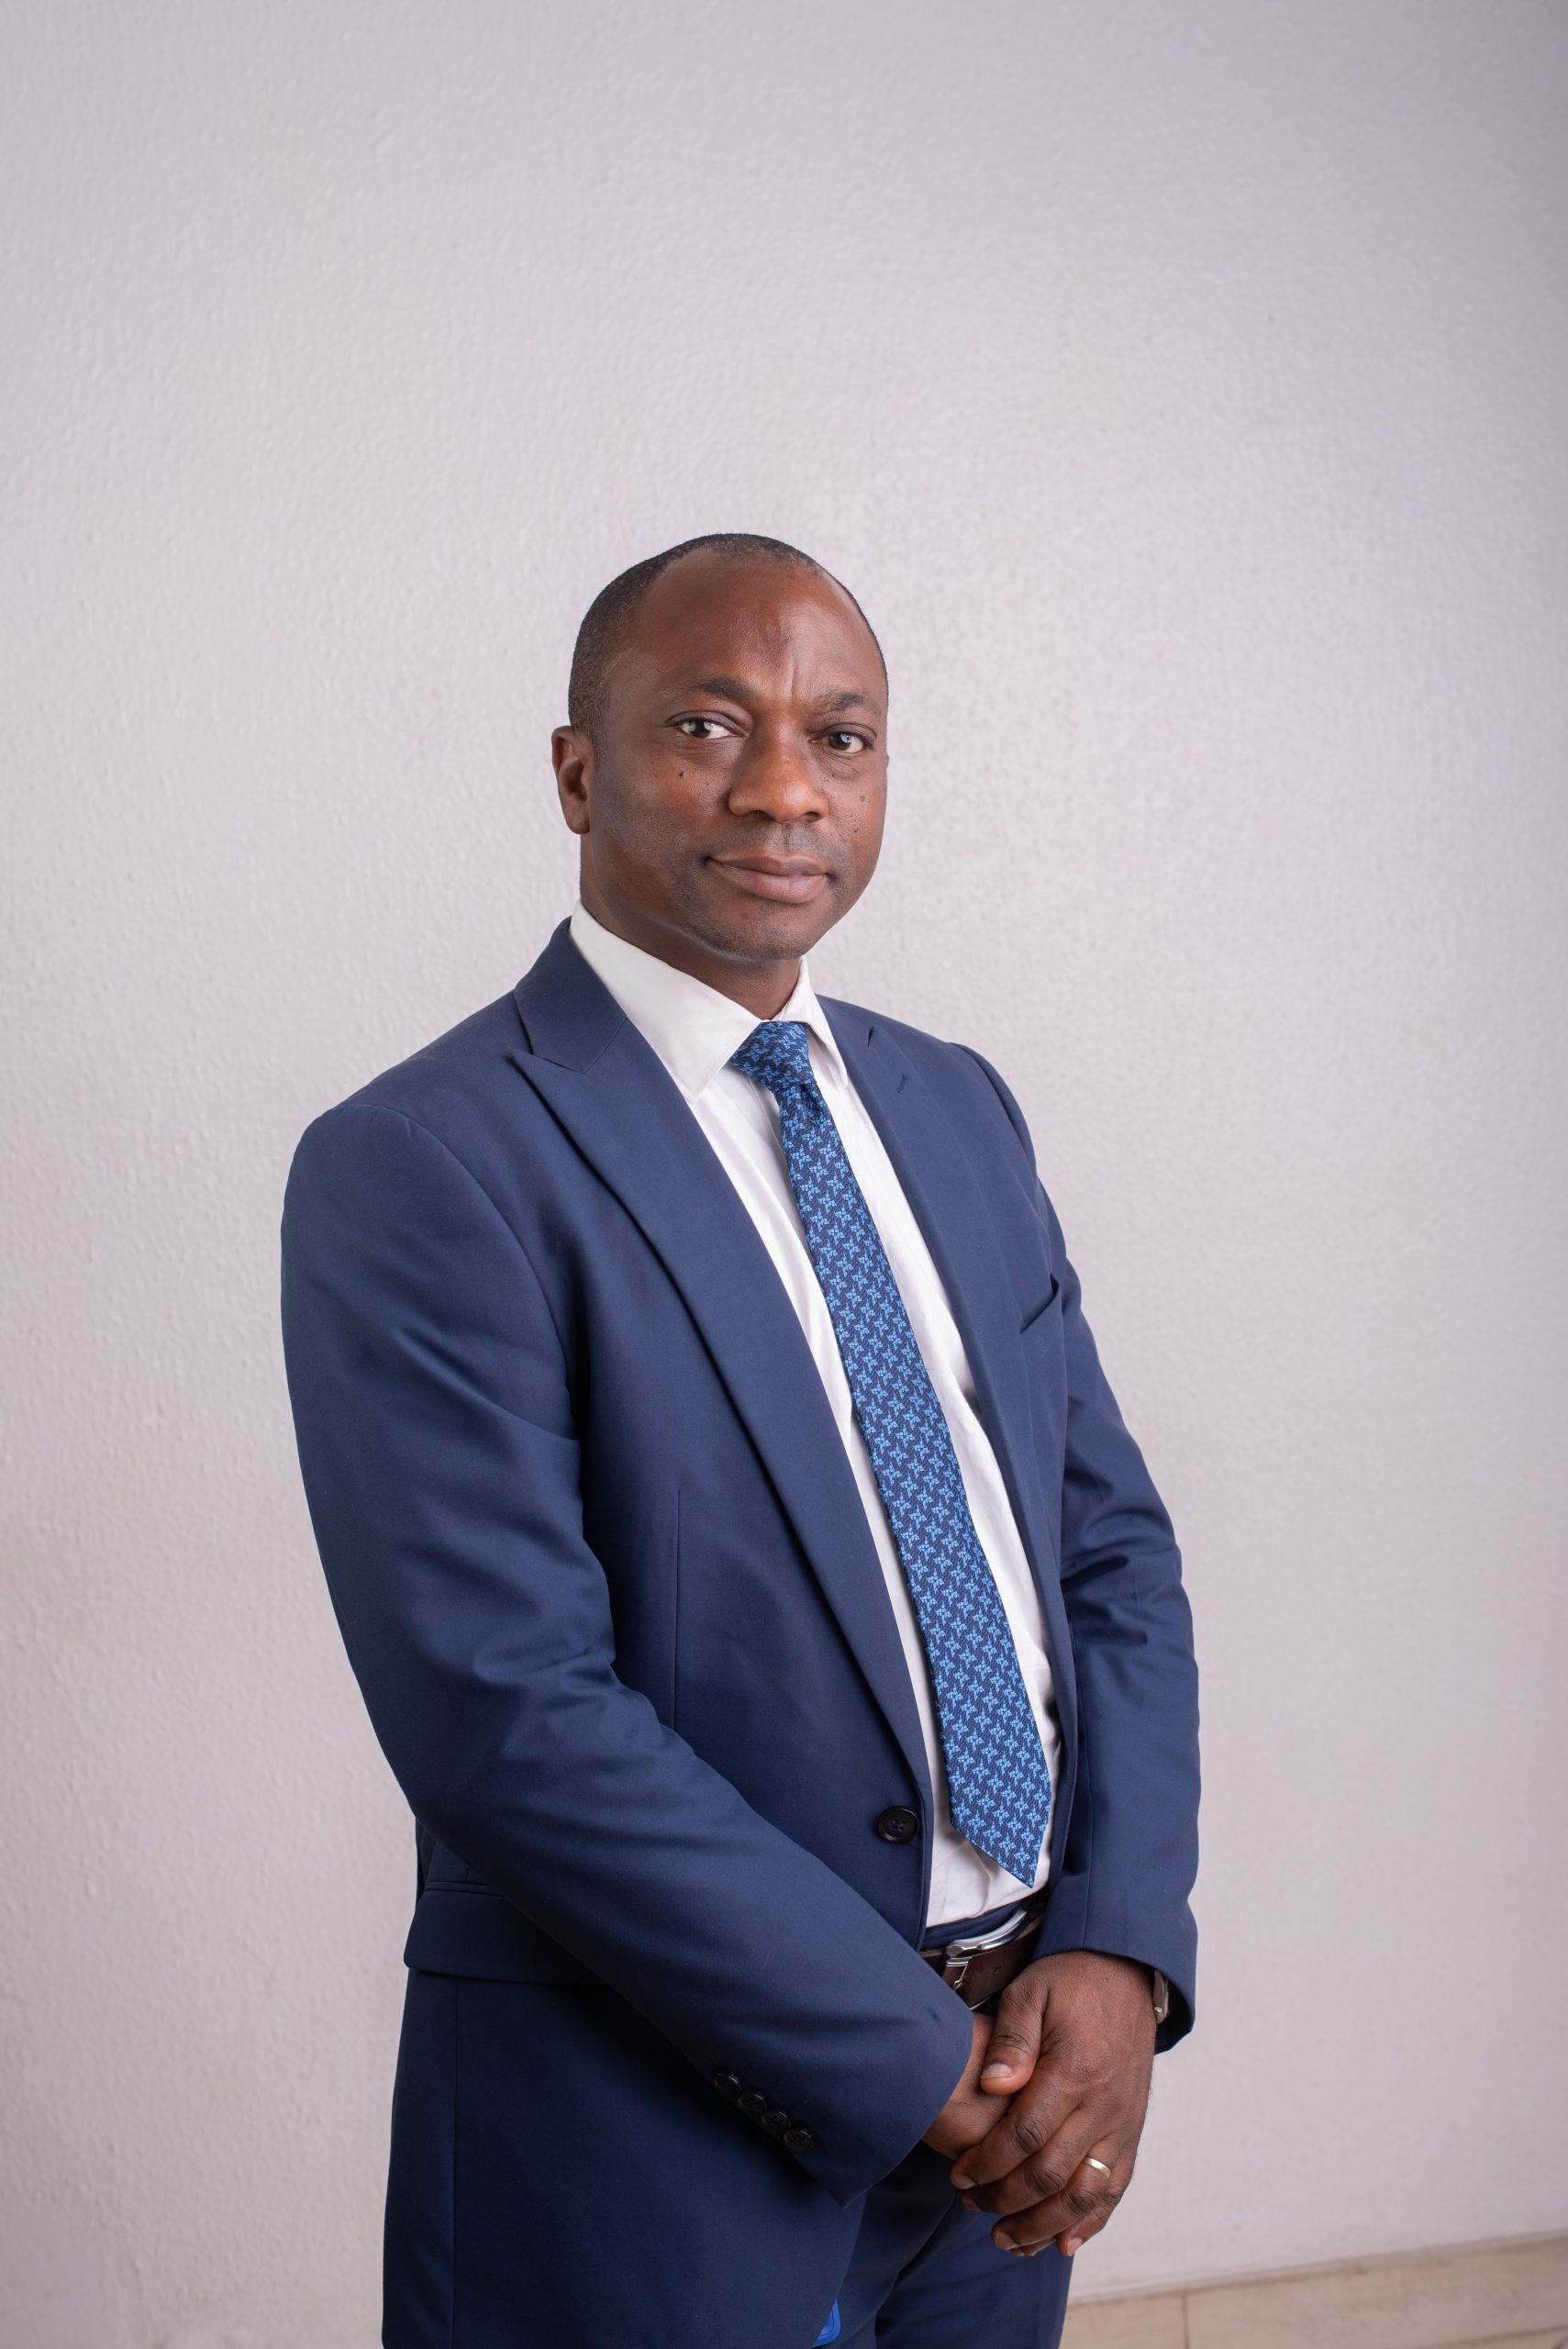 Olalekan Ayodeji Bankole is the Group Chief Financial Officer of Superflux International Limited.